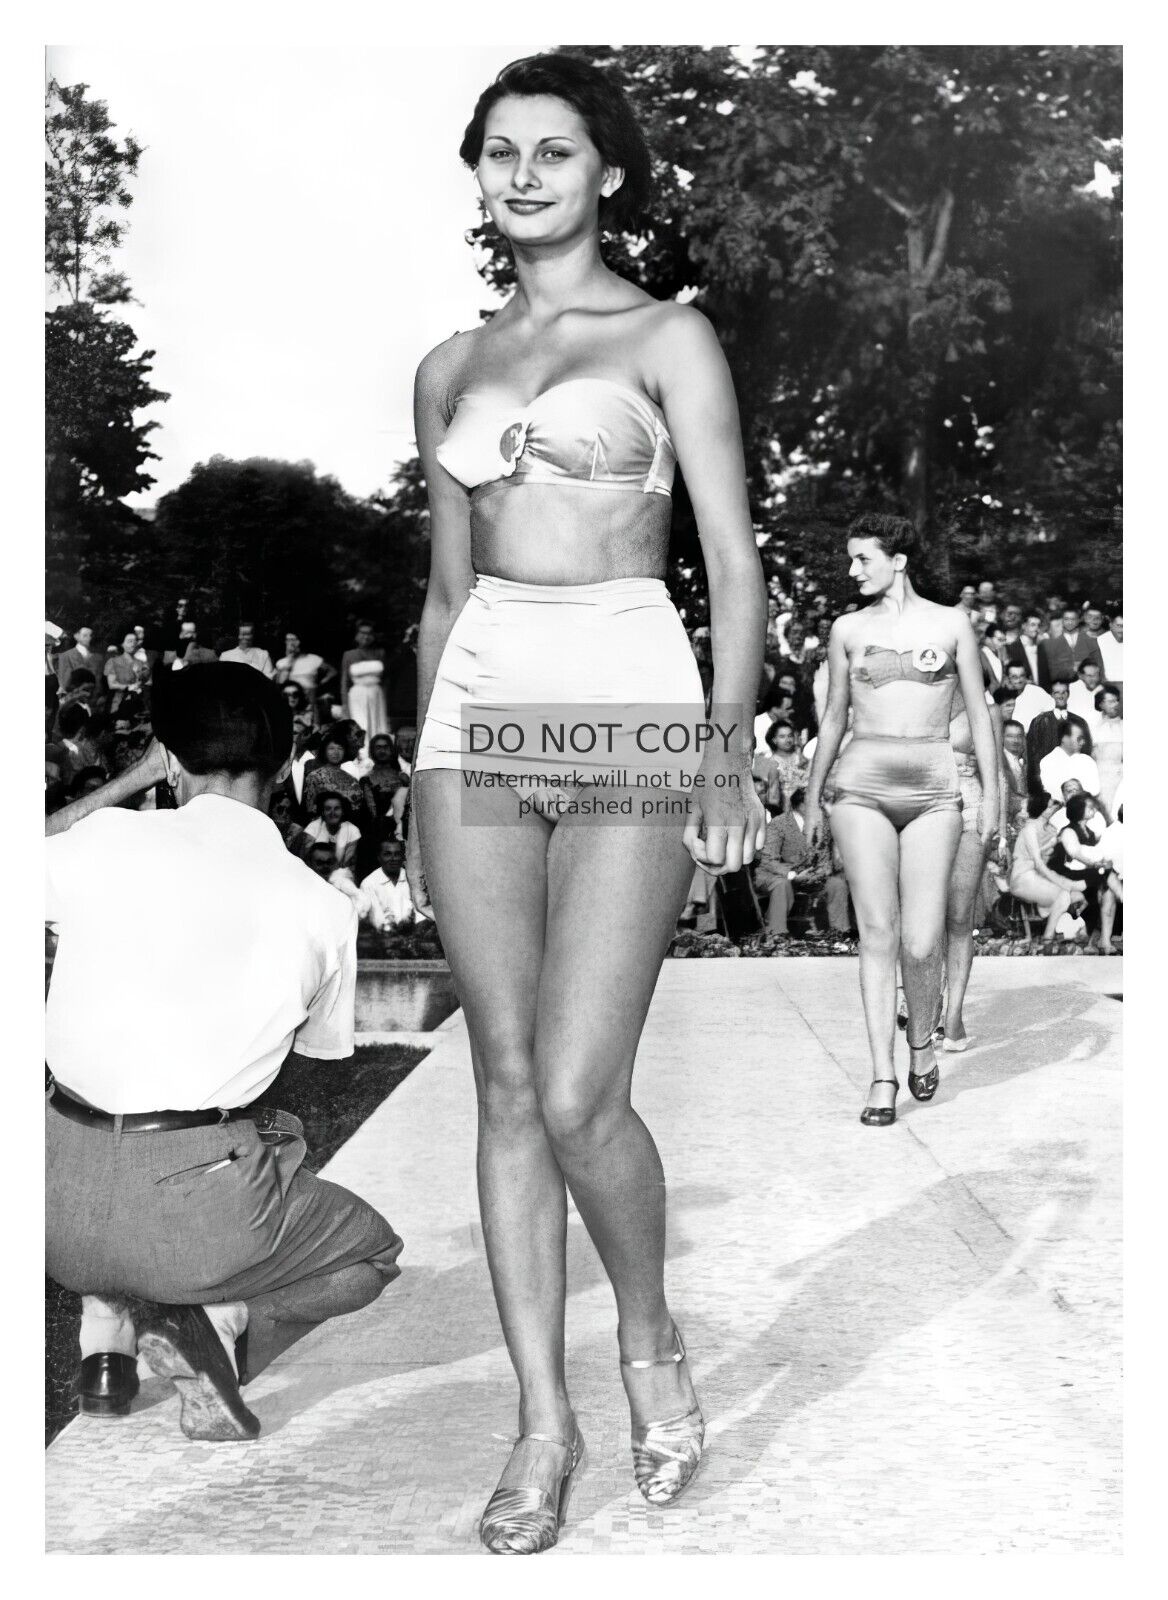 YOUNG SOPHIA LOREN AT BEAUTY CONTEST IN NAPLES FRANCE 1949 5X7 B&W PHOTO